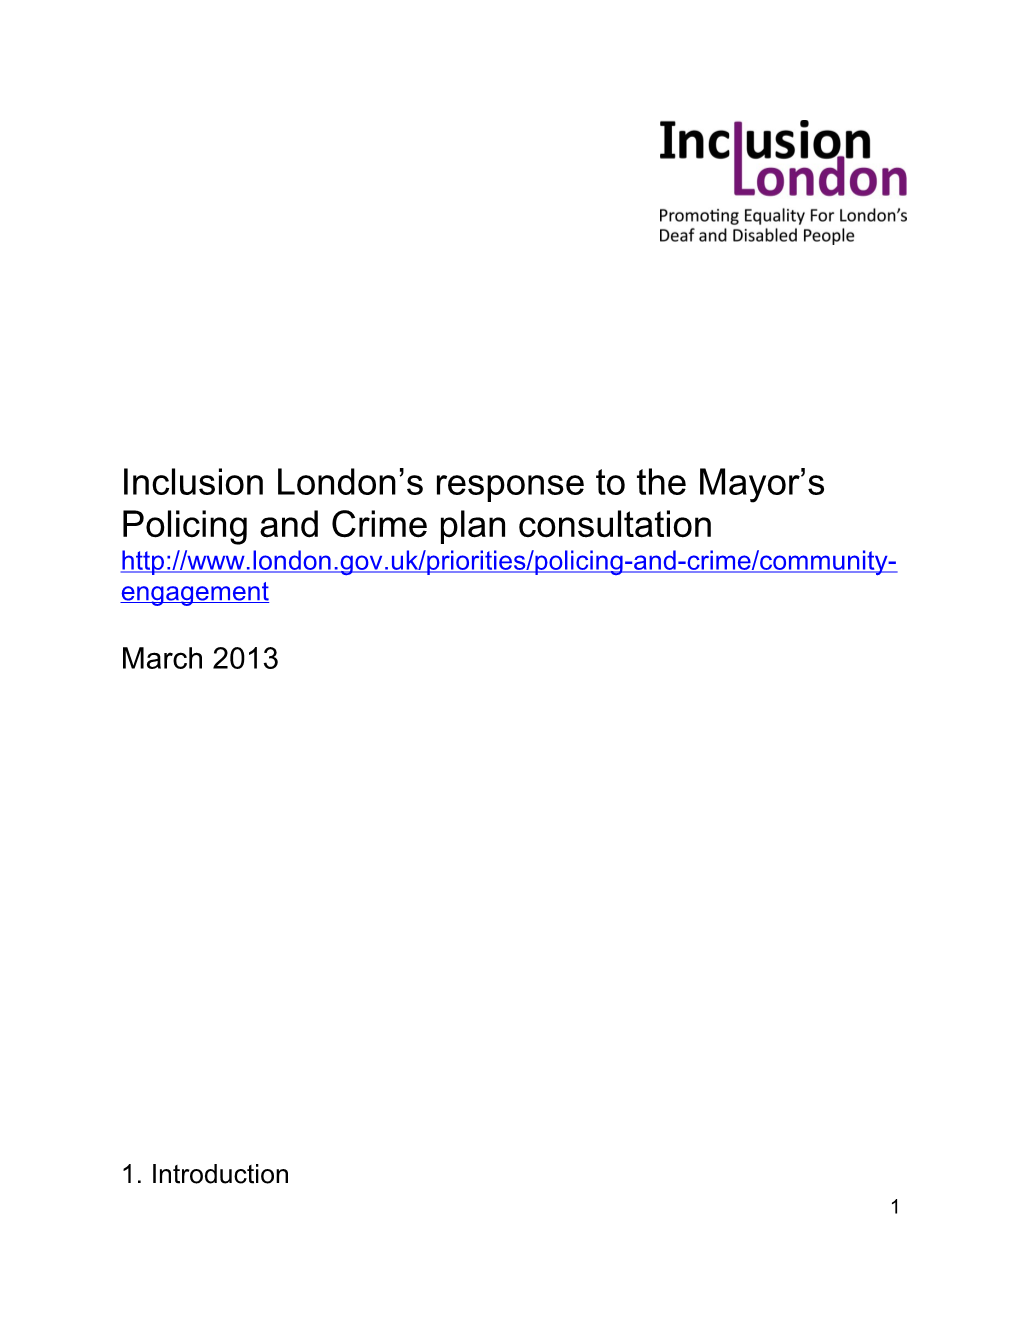 Inclusion London S Response to the Mayor S Policing and Crime Plan Consultation